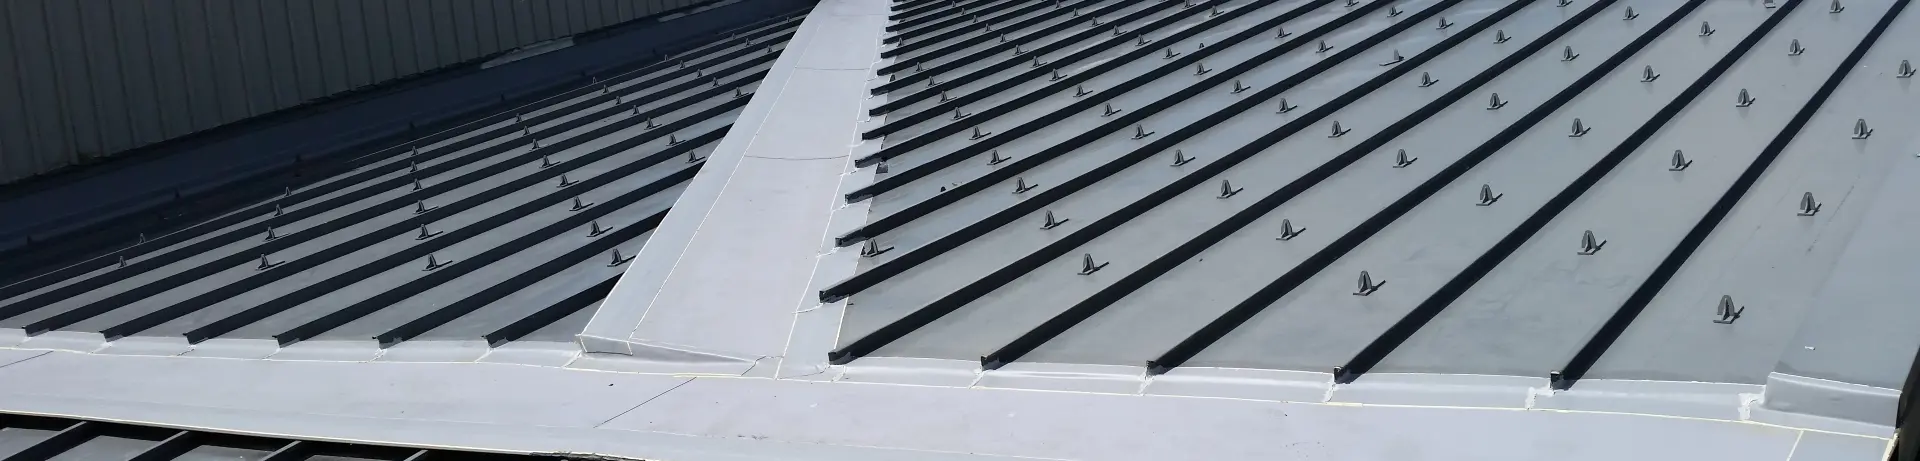 A closeup image of a commercial metal roof.